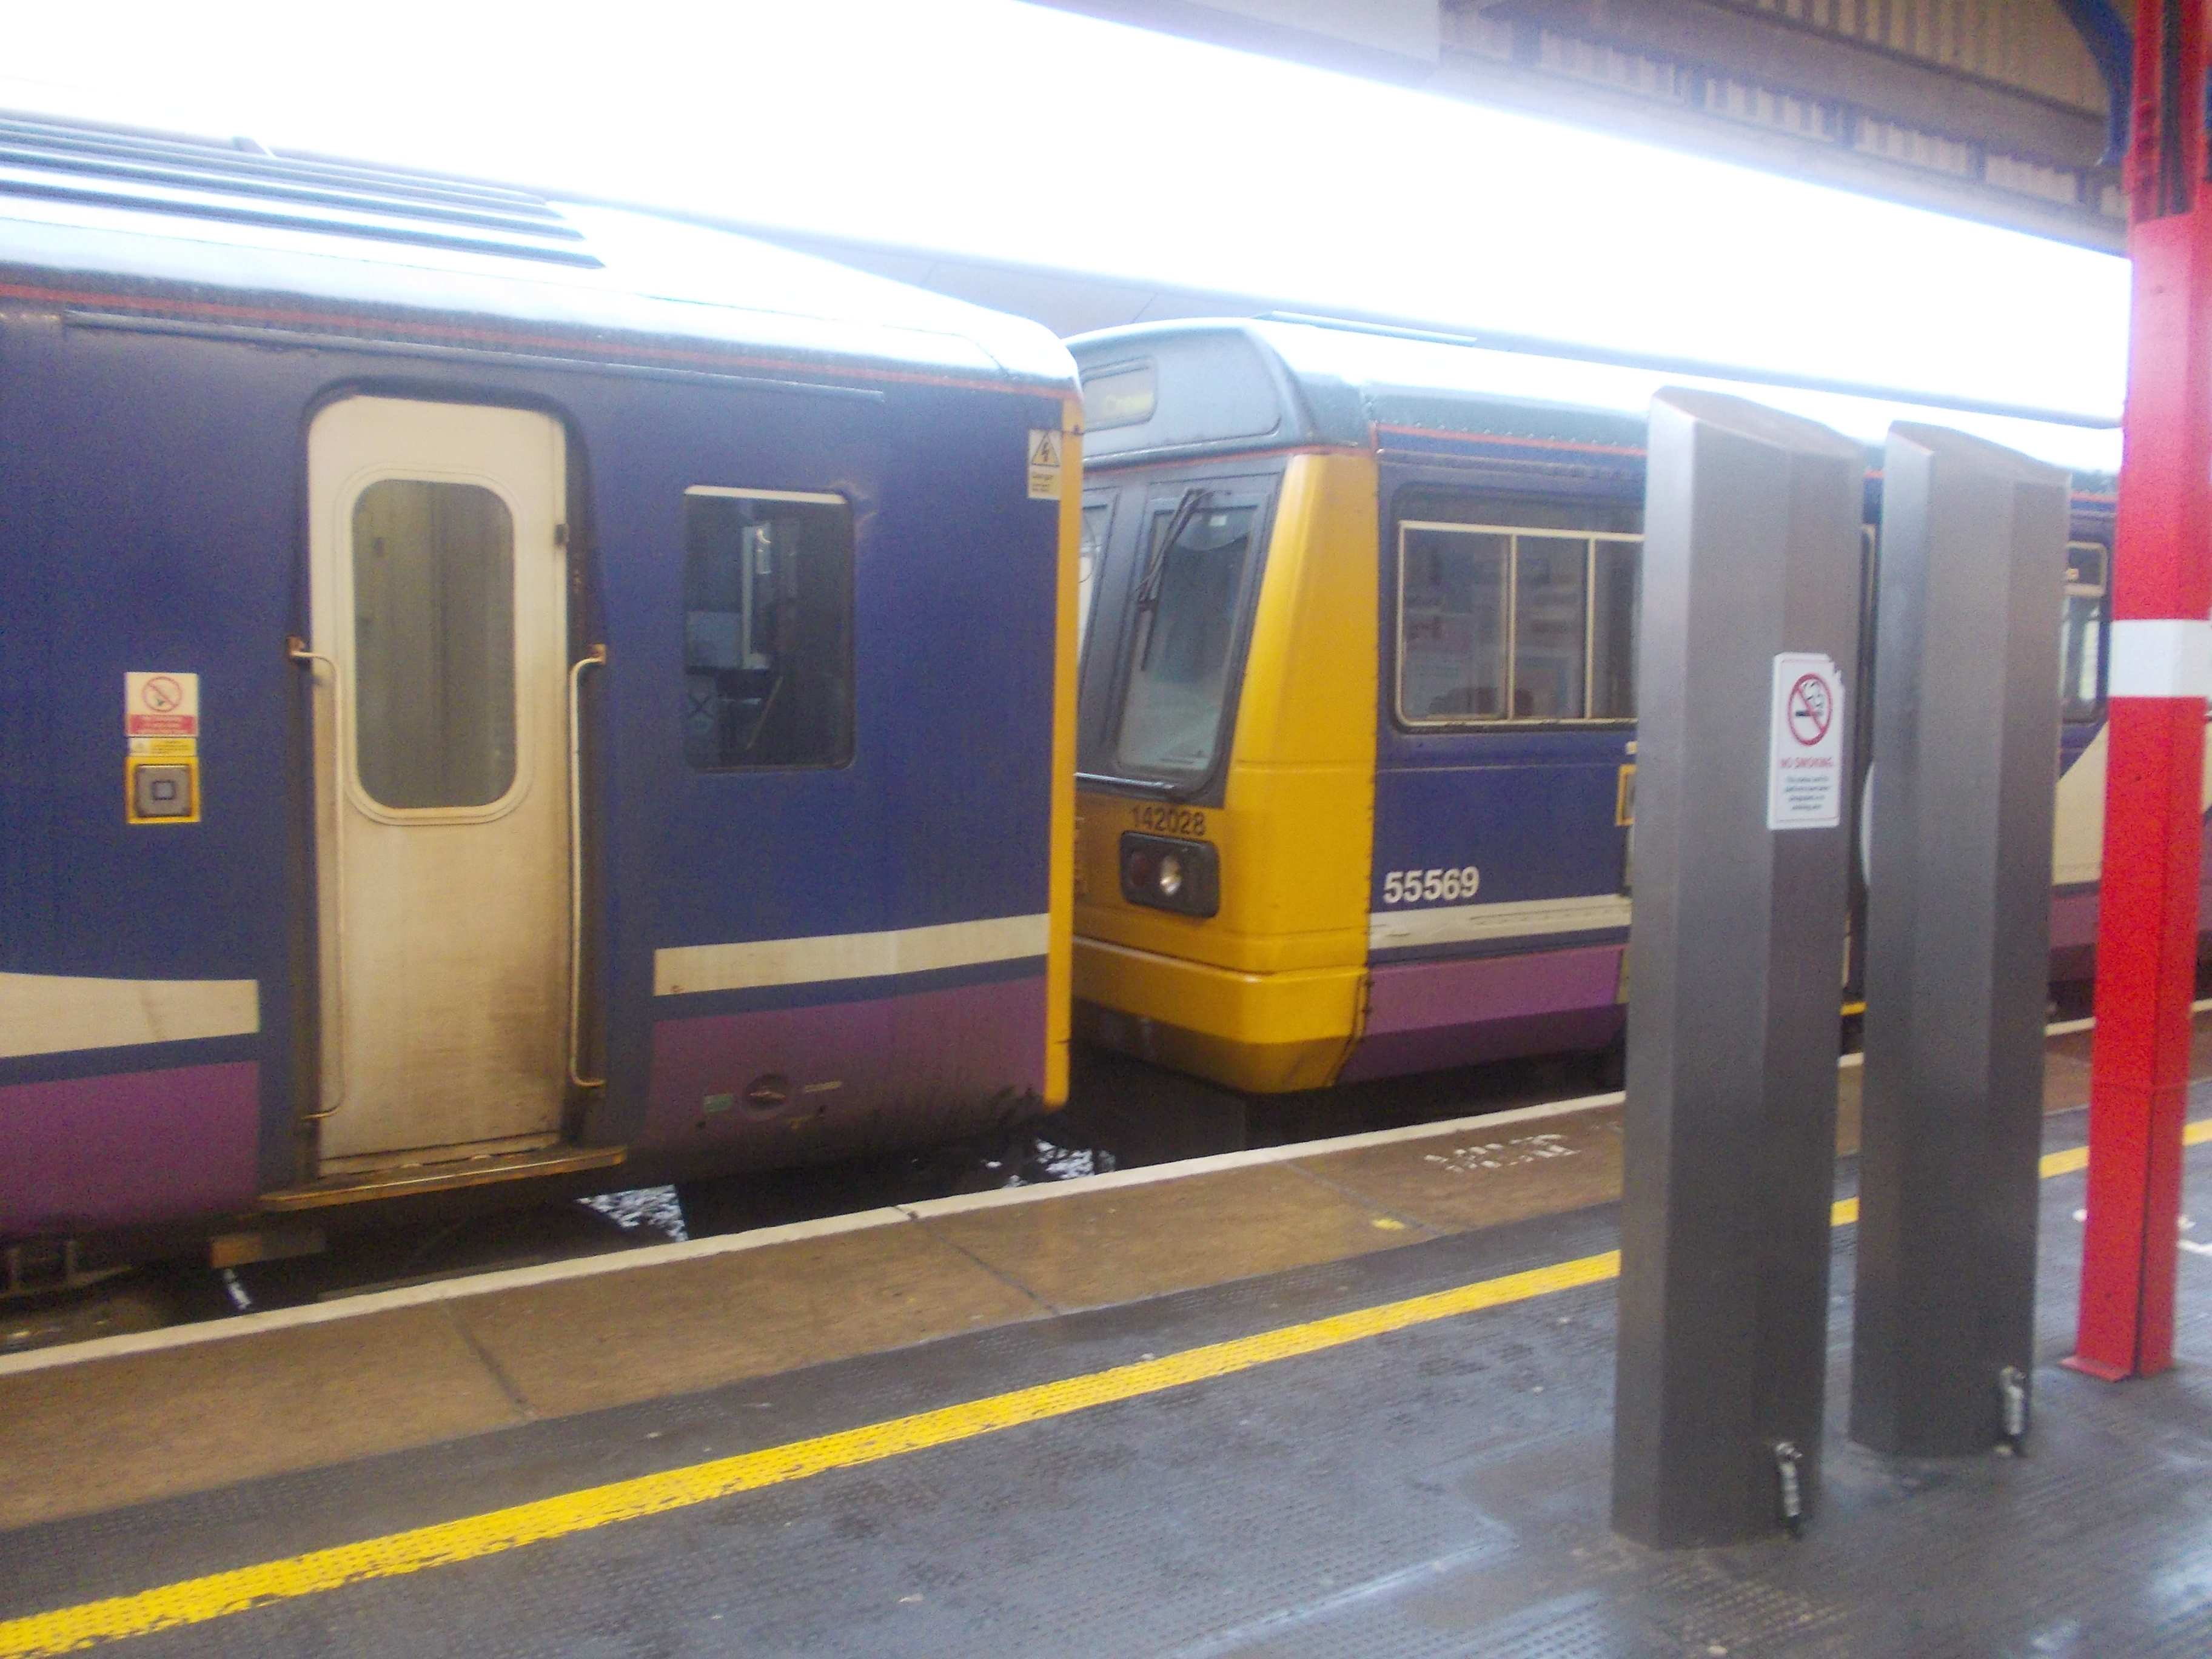 142028, the pacer that we'd be carting up empty to Stalybridge